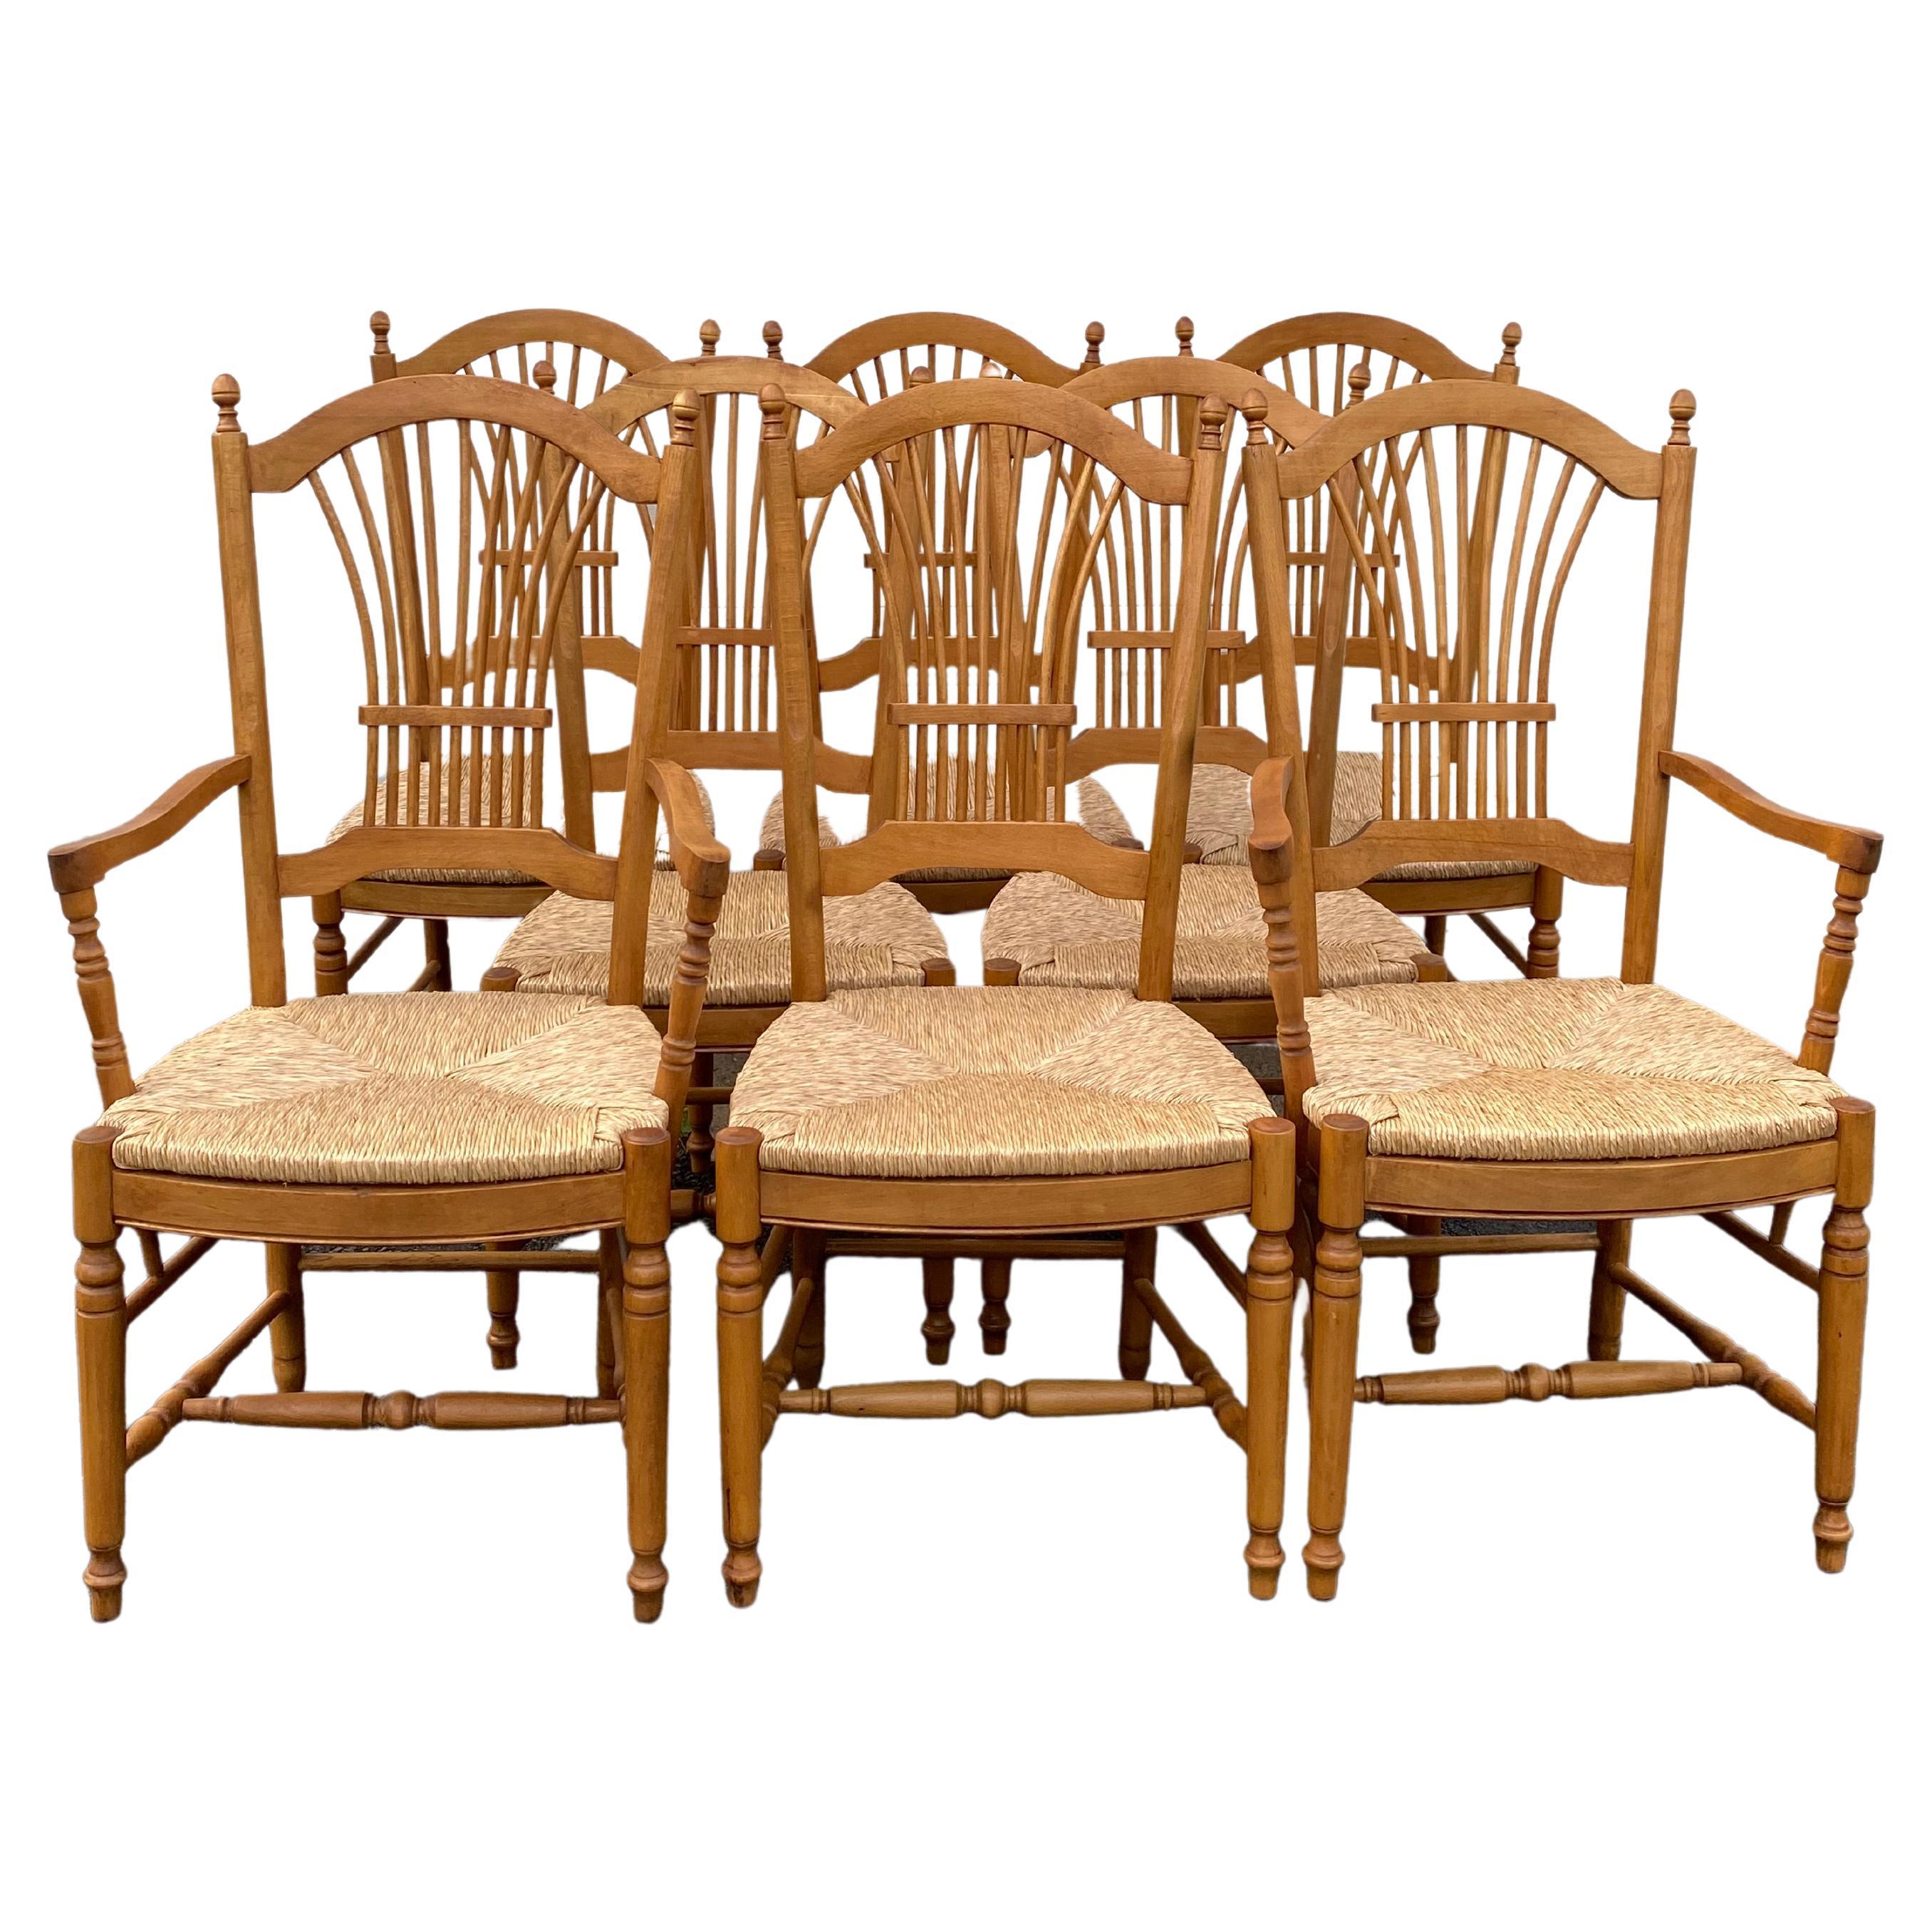 Set of 8 Classic Vintage French Wheat Sheaf Motif Dining Chairs with Rush Seats